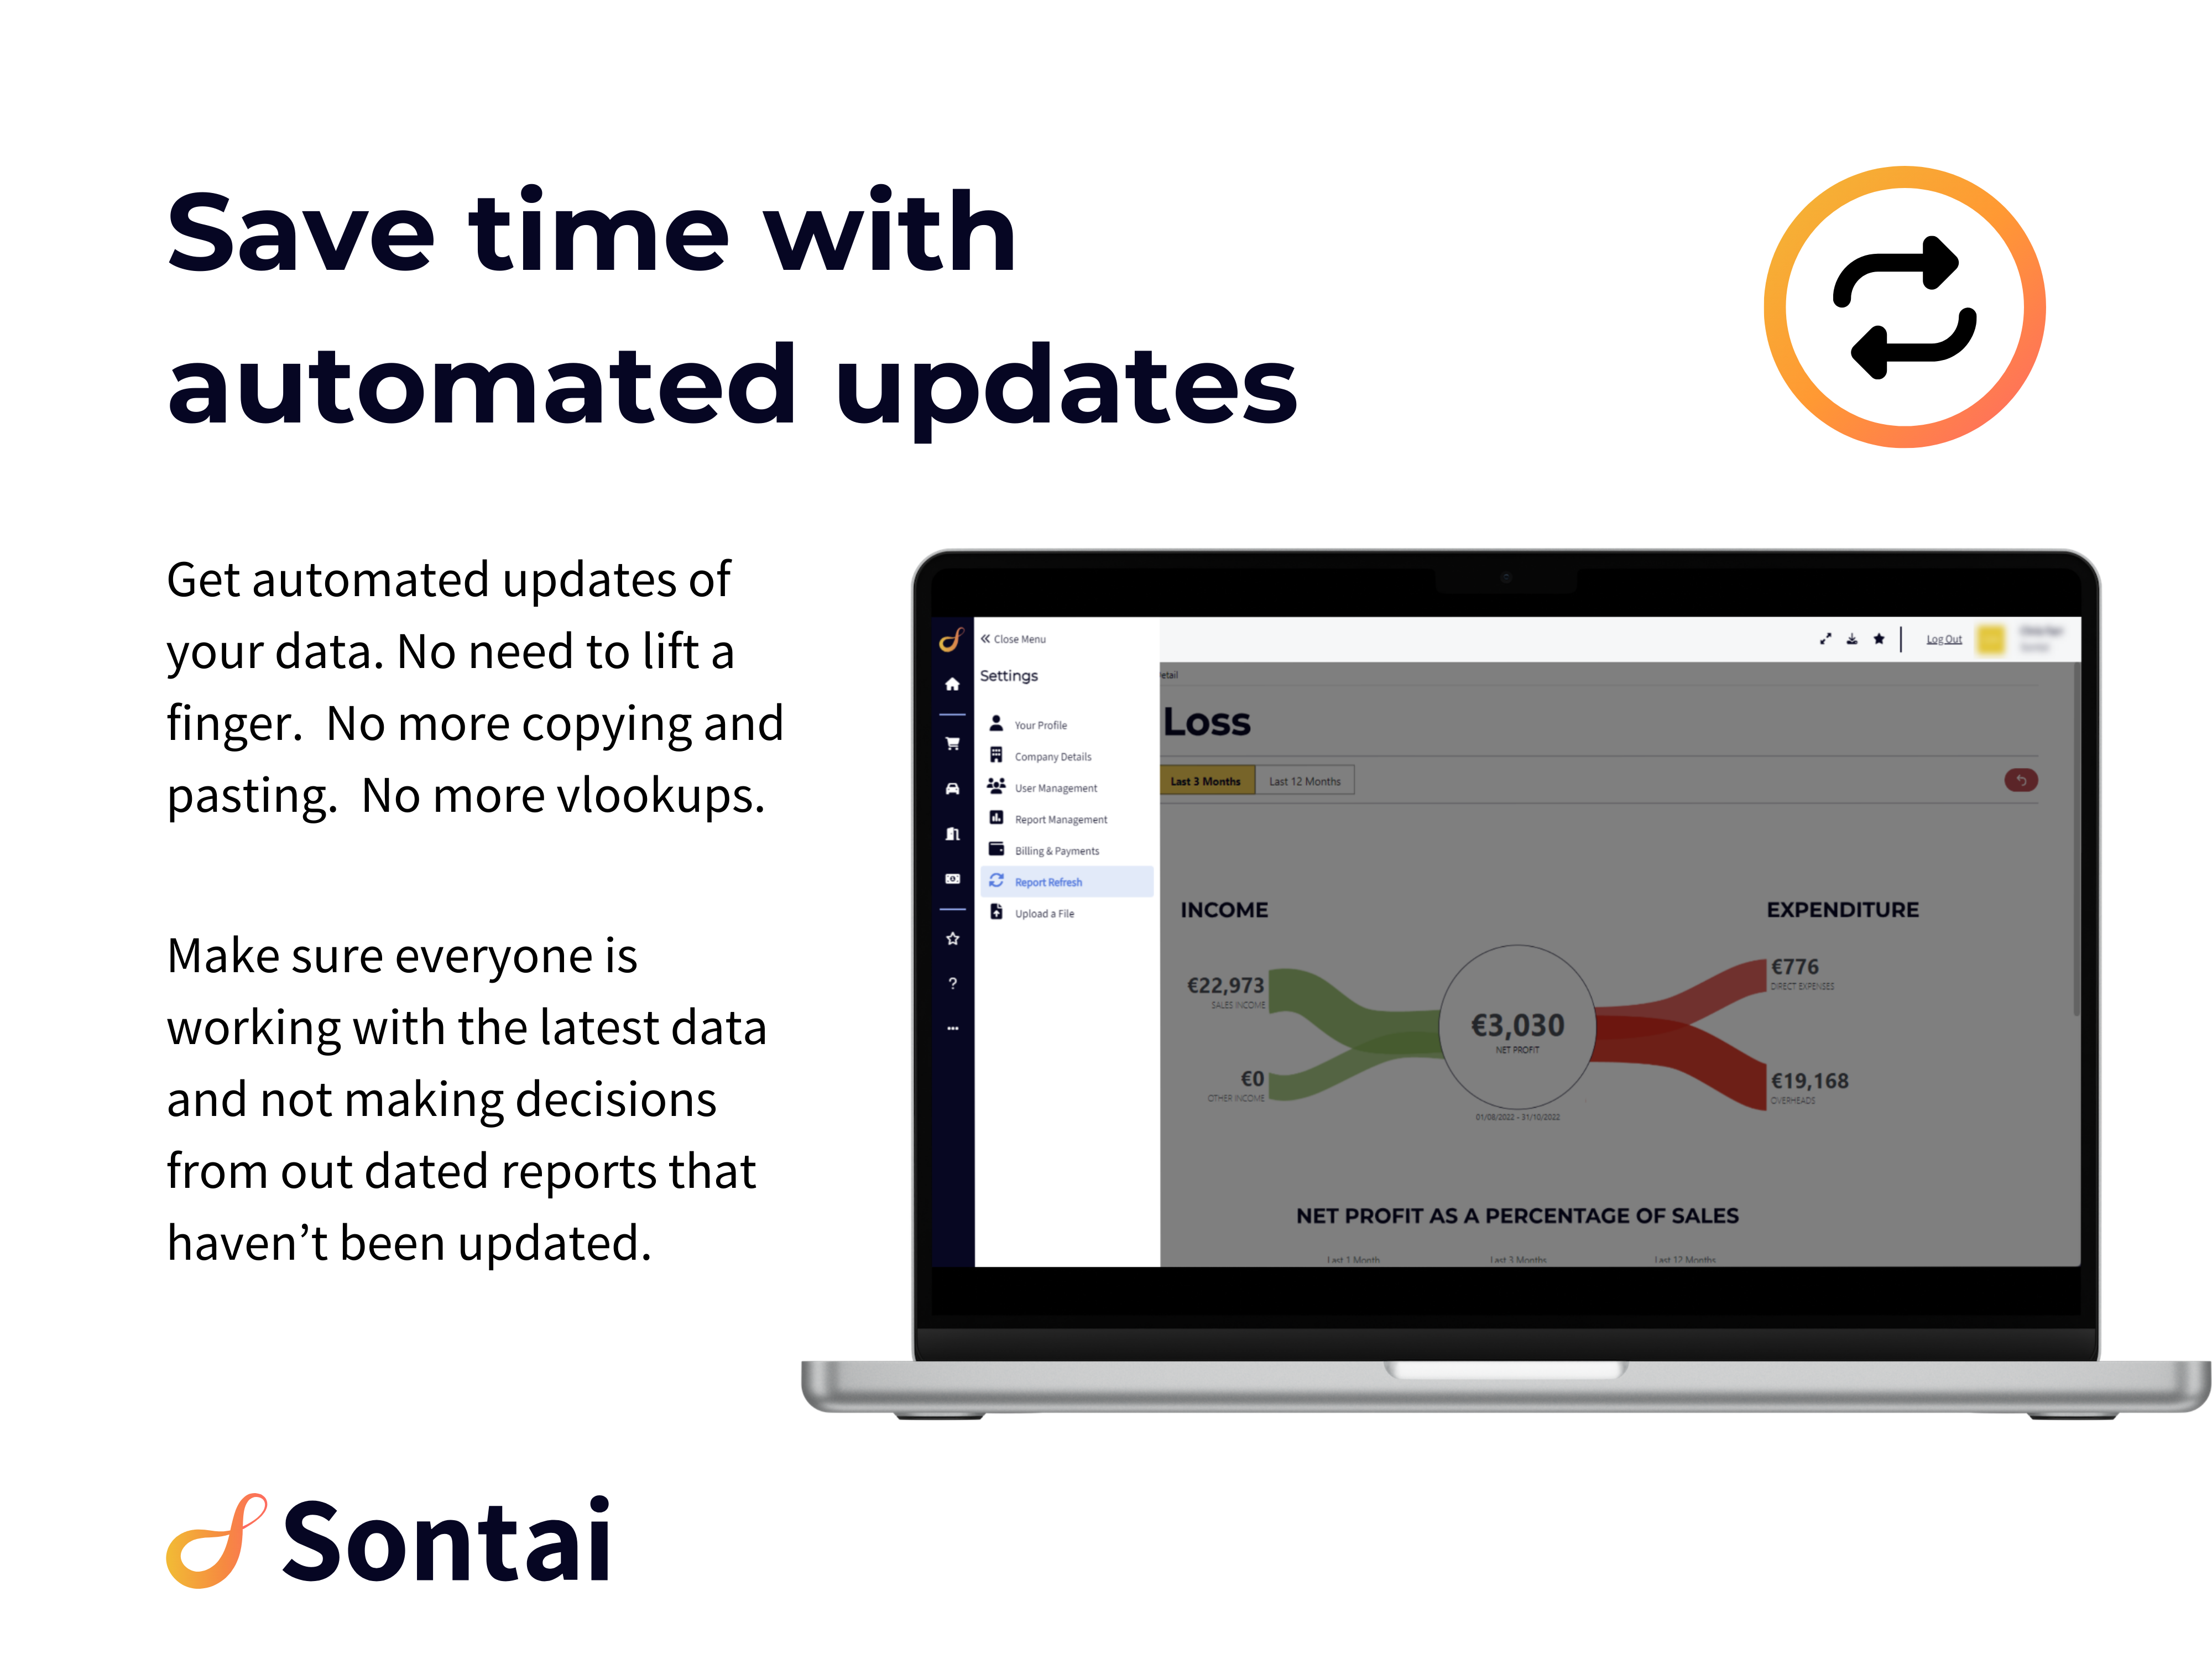 Save time with automated data updates from Sontai